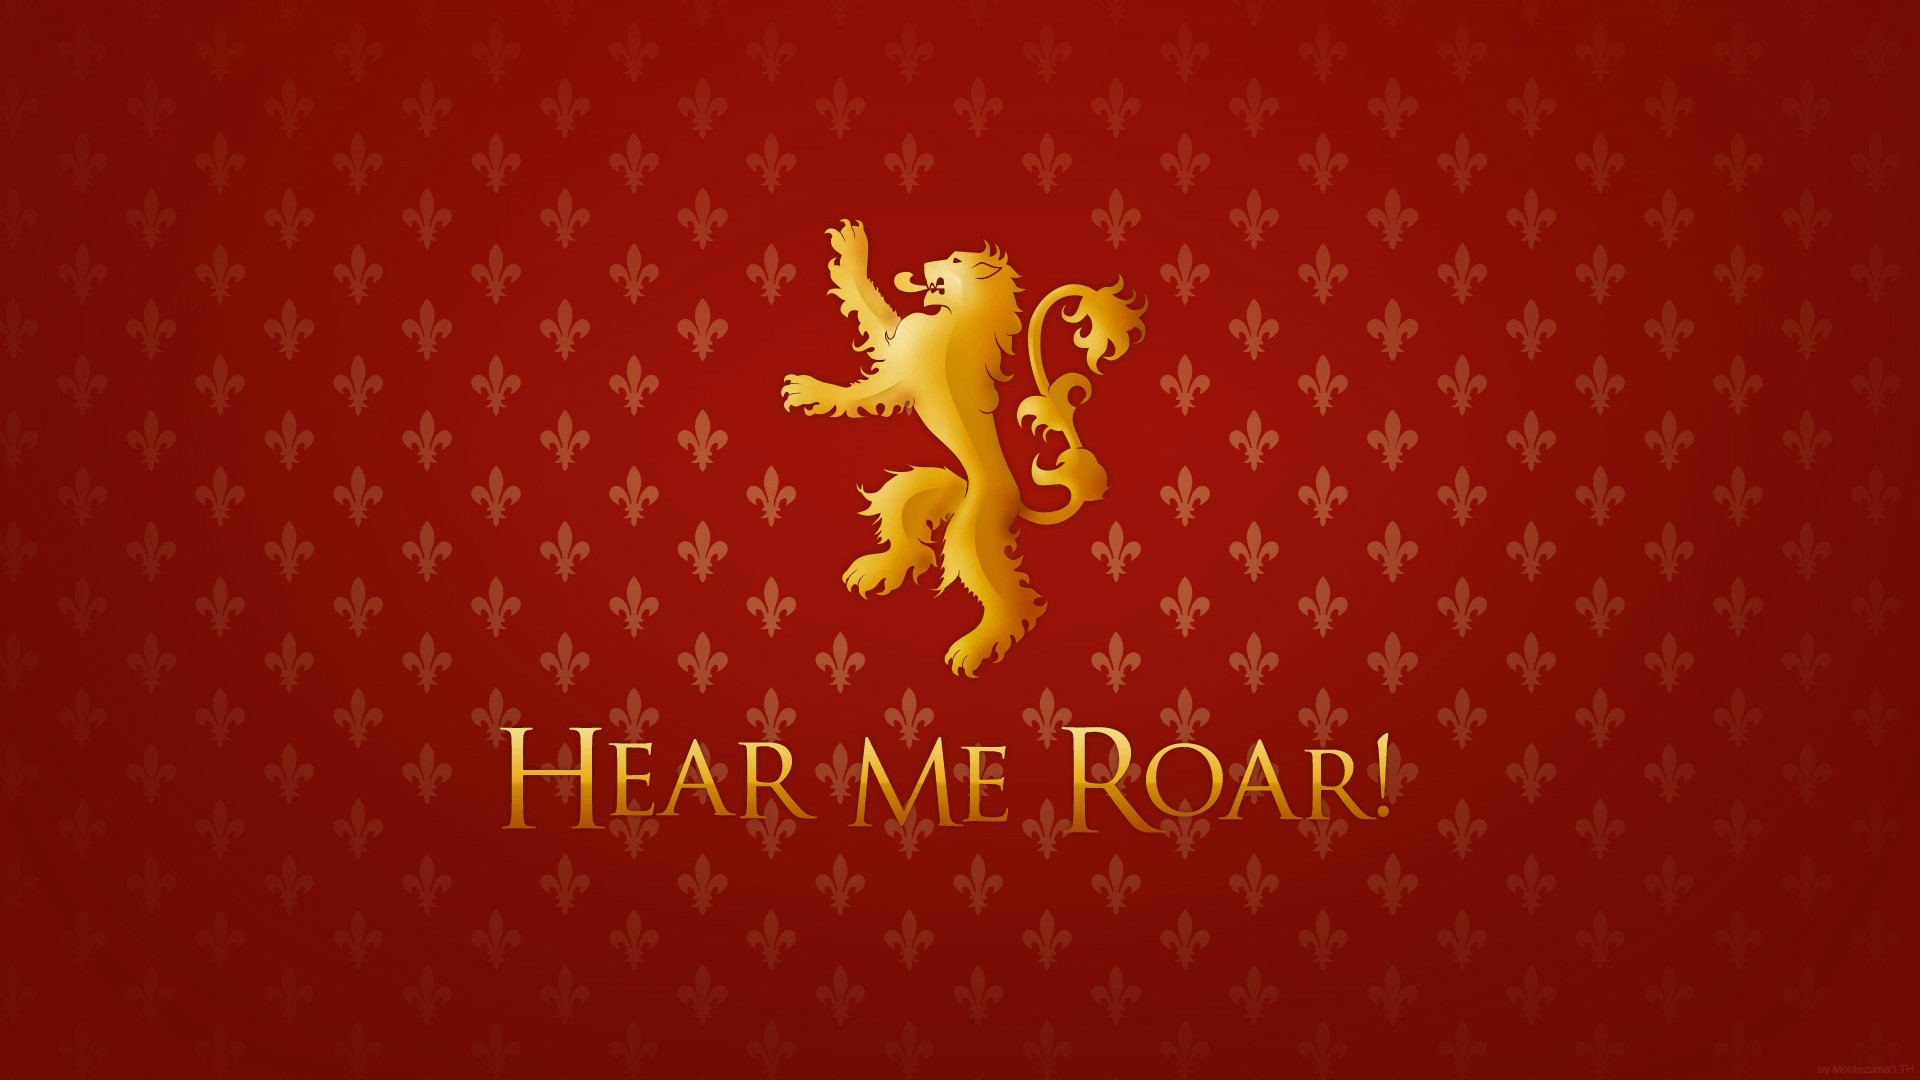 Game Of Thrones Sigils House Lannister 1920x1080